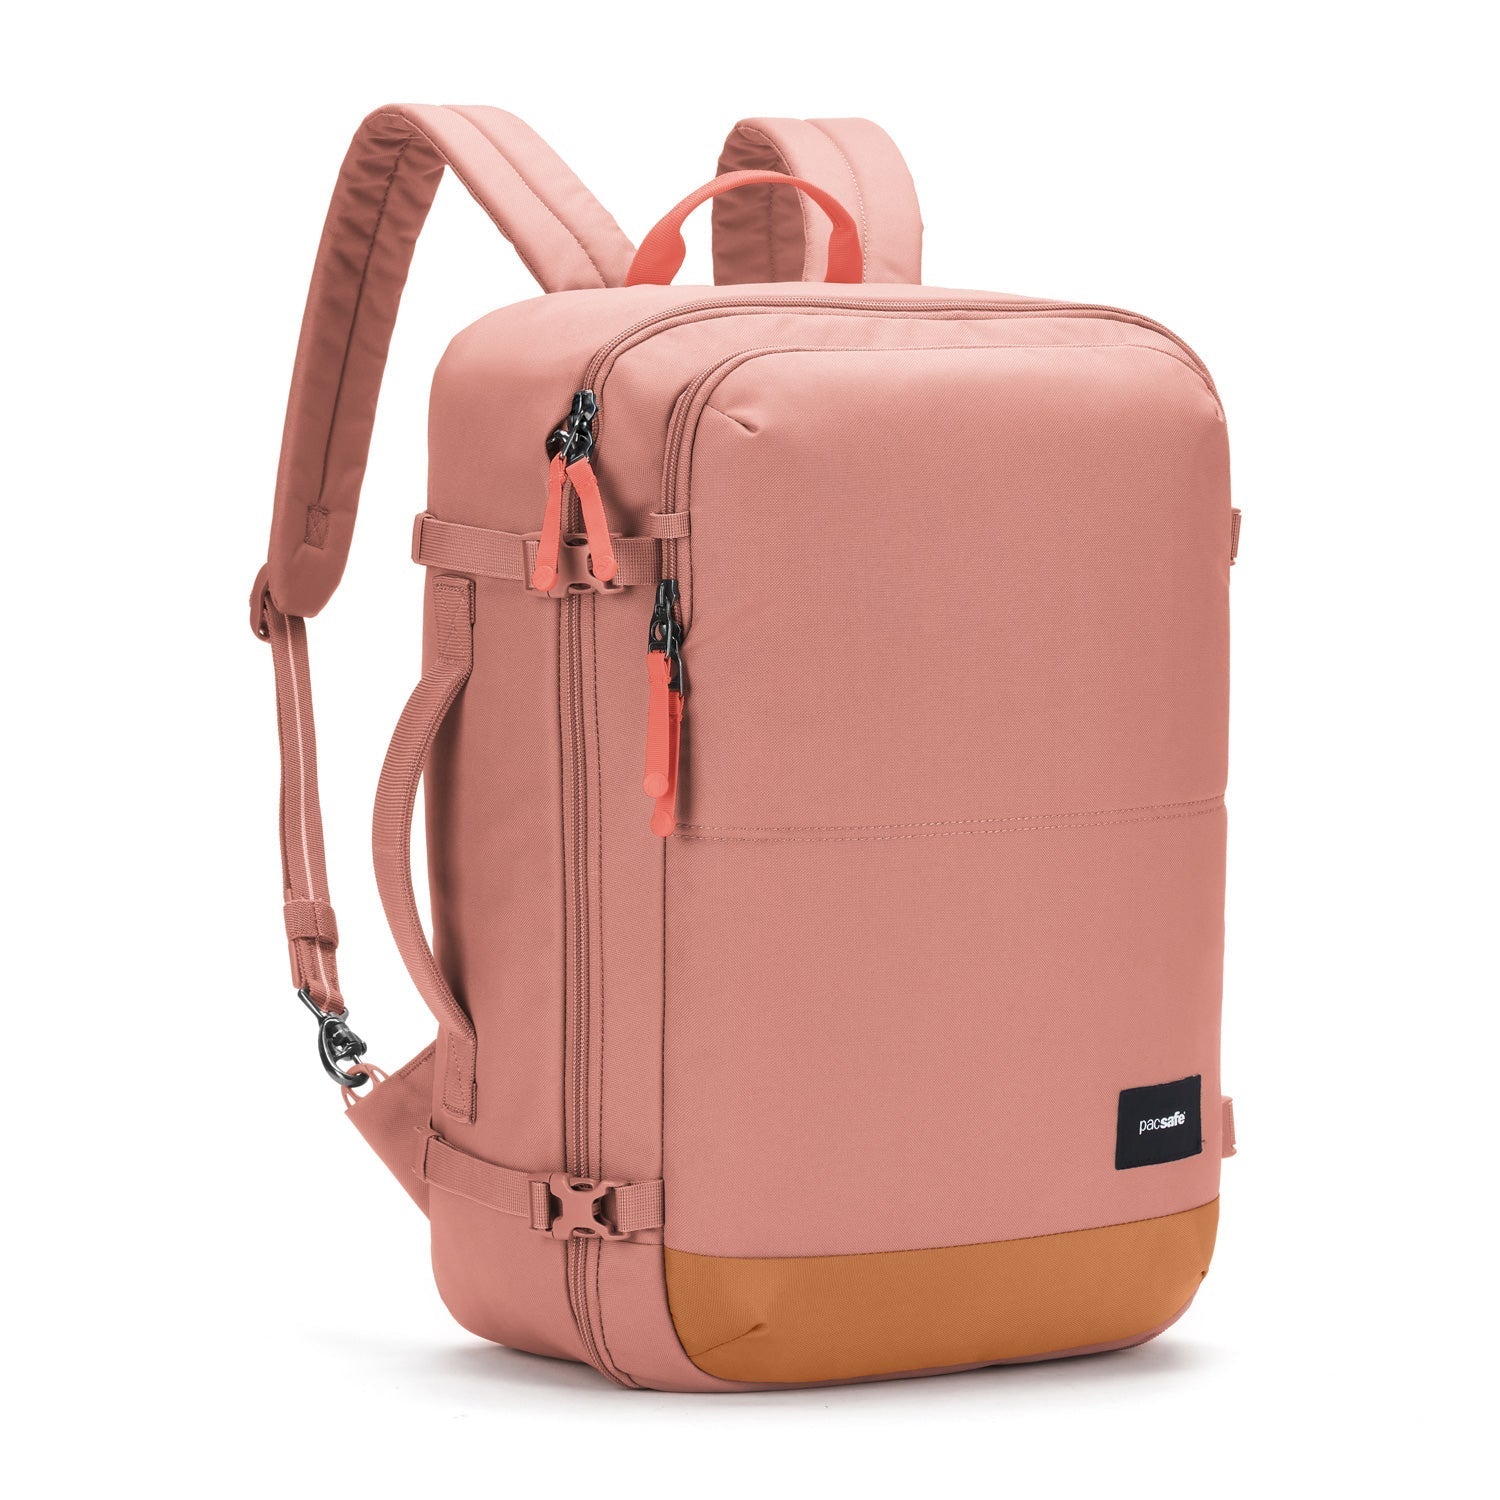 Pacsafe - Pacsafe GO Carry-on Backpack 34L - Rose-13